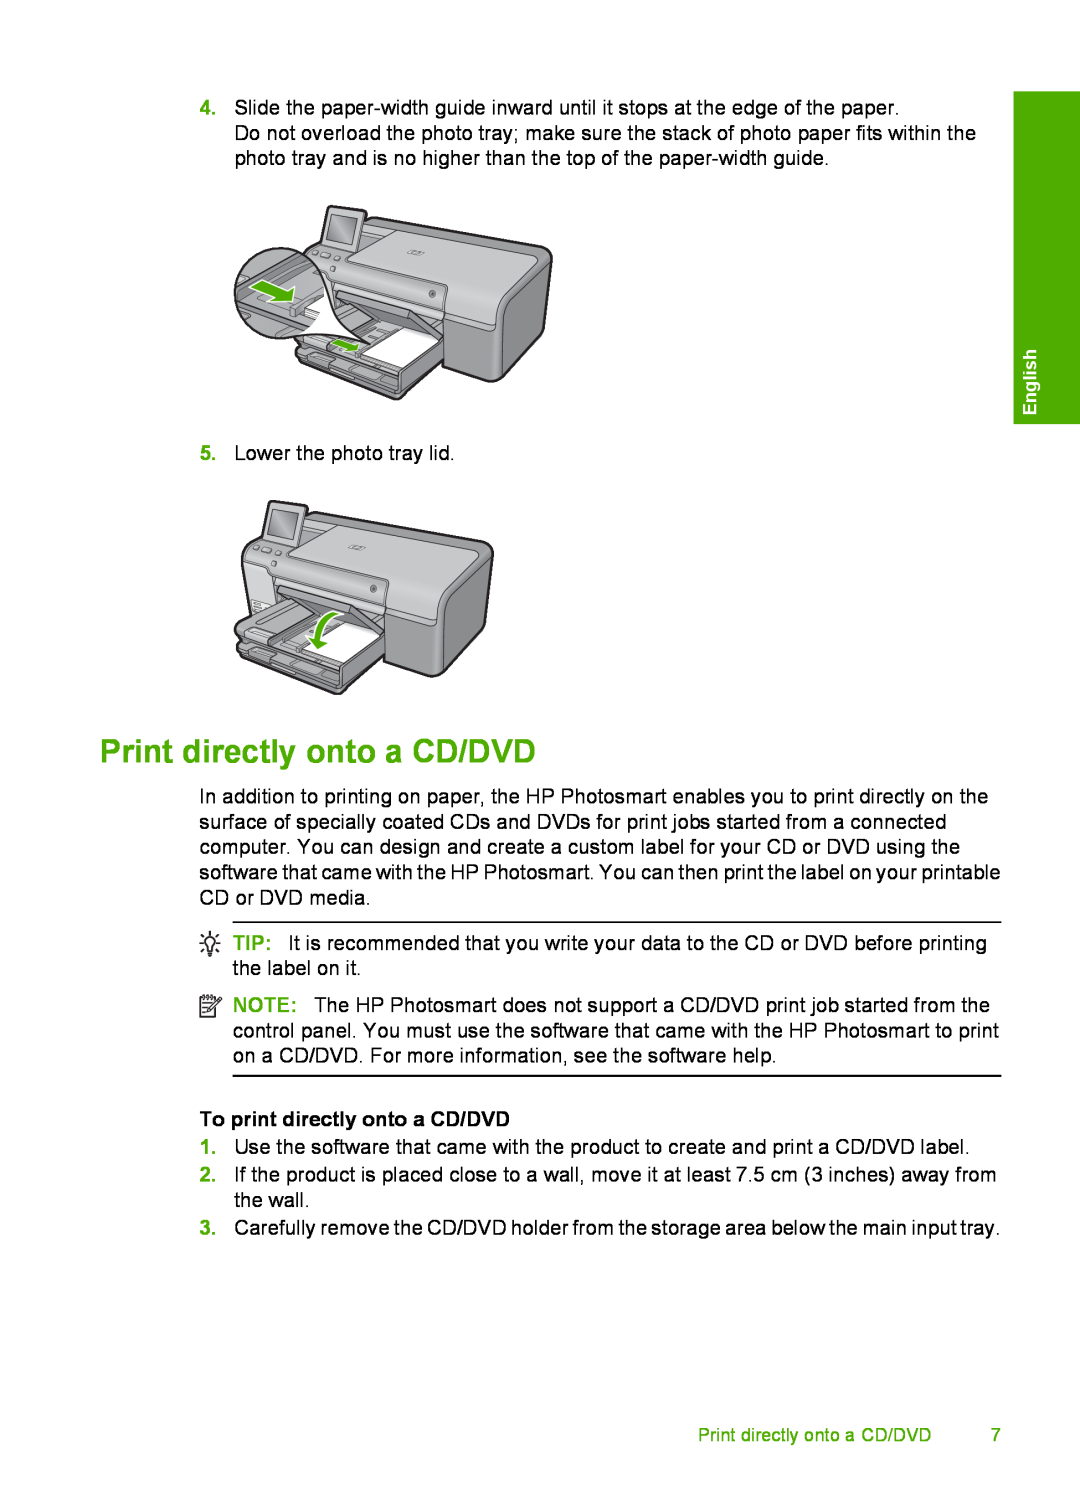 HP D7560 manual Print directly onto a CD/DVD, To print directly onto a CD/DVD 